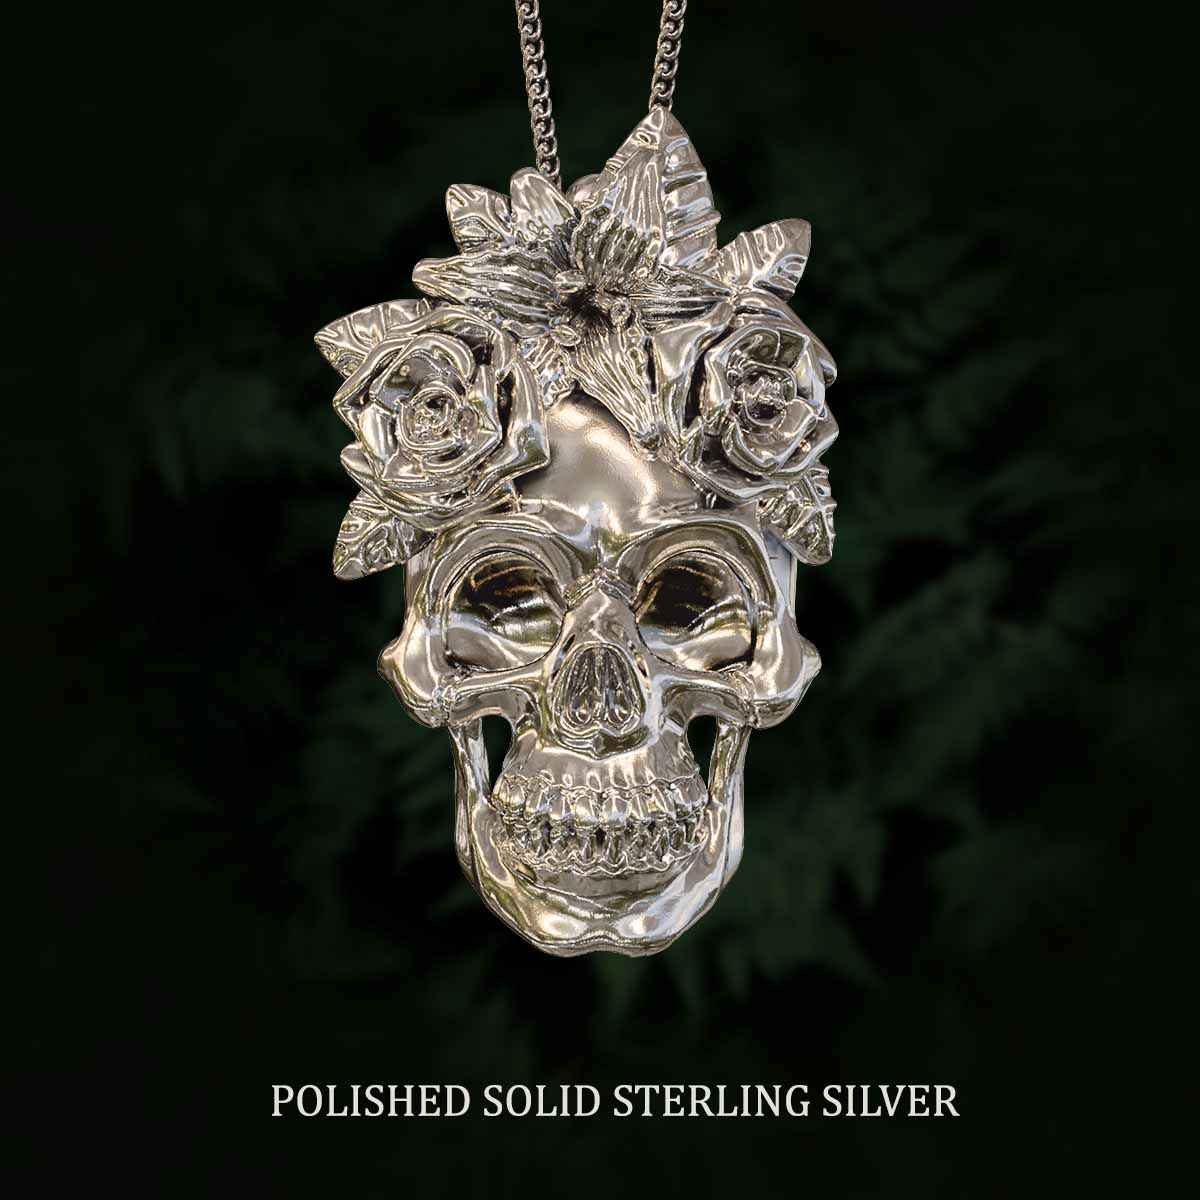     Polished-Solid-Sterling-Silver-Human-Skull-and-Flowers-Pendant-Jewelry-For-Necklace